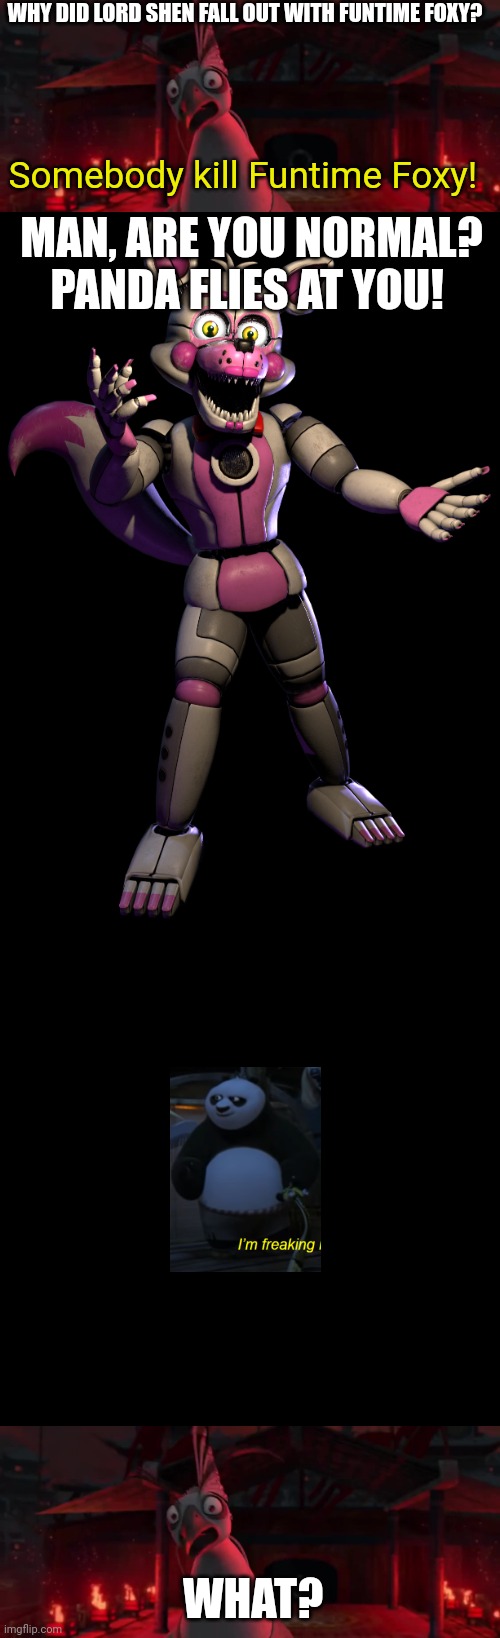 Somebody kill Funtime Foxy Lord Shen | WHY DID LORD SHEN FALL OUT WITH FUNTIME FOXY? Somebody kill Funtime Foxy! MAN, ARE YOU NORMAL? PANDA FLIES AT YOU! WHAT? | image tagged in angry lord shen,funtime foxy,memes,blank transparent square | made w/ Imgflip meme maker